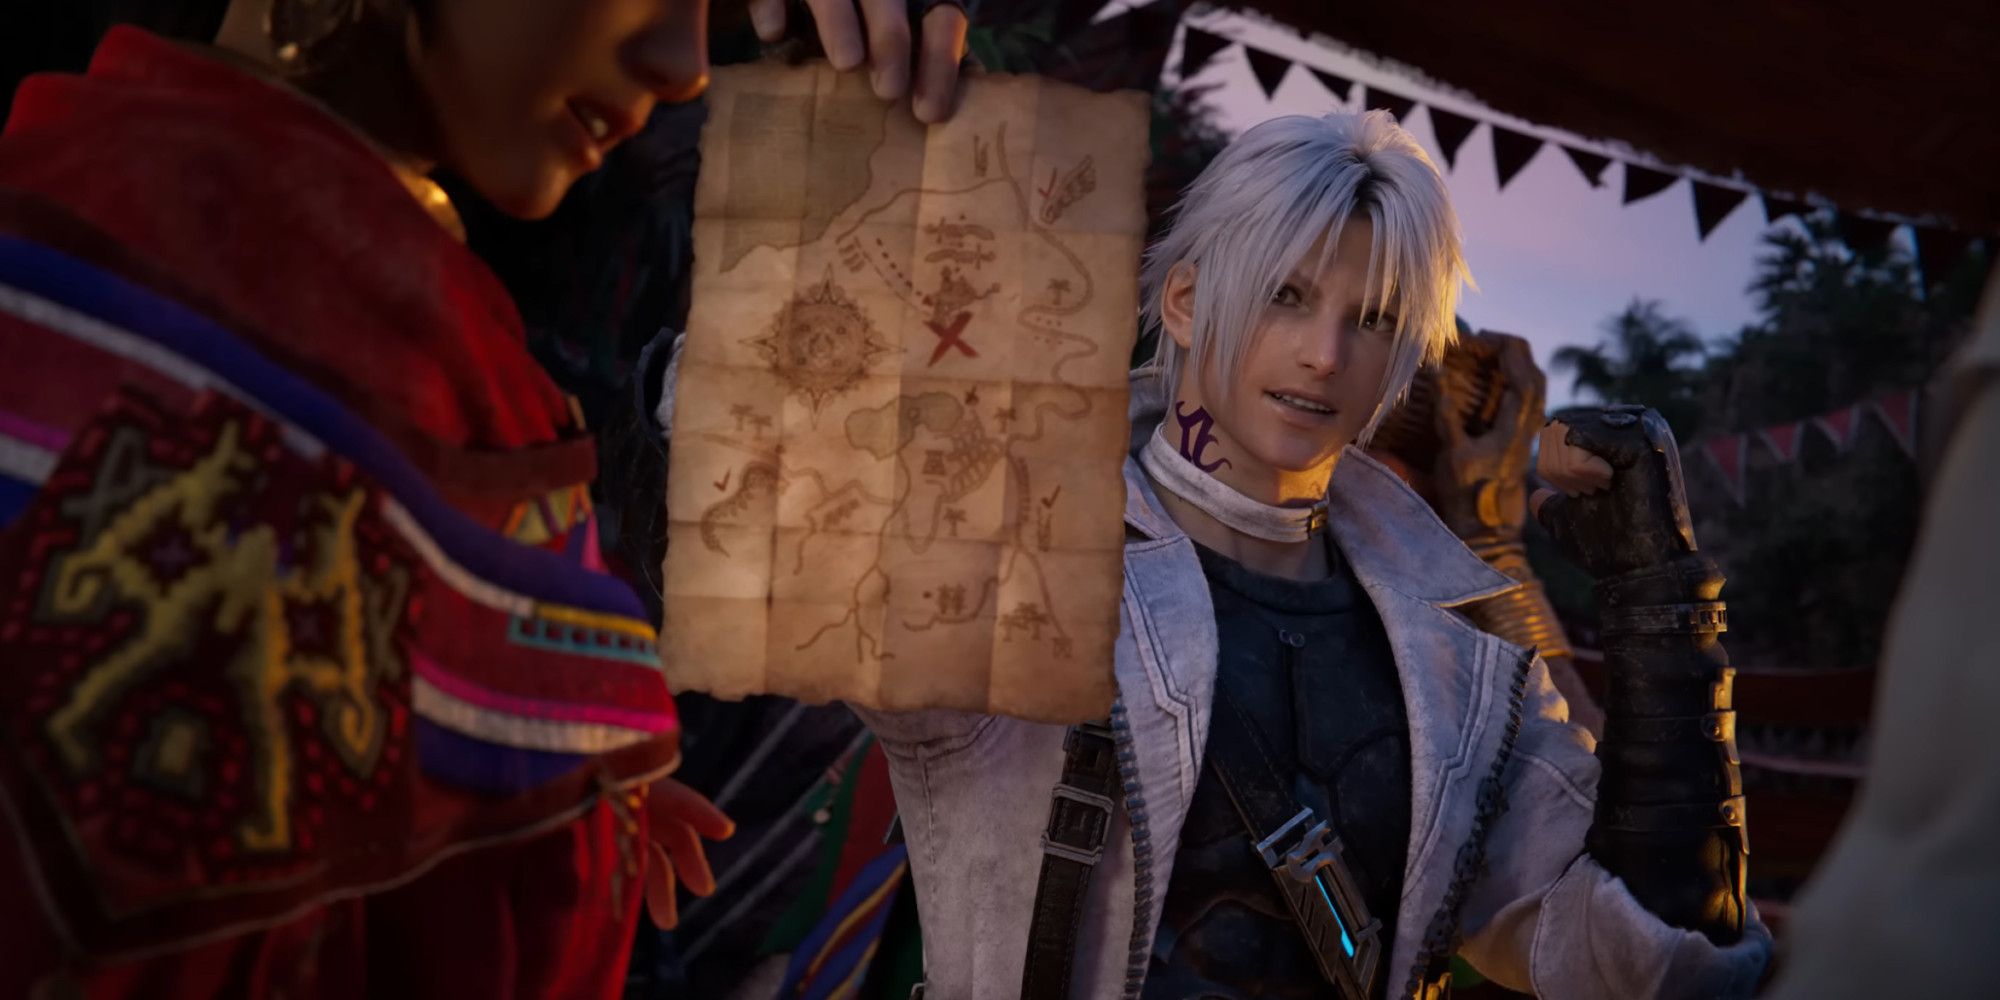 Thancred holding up a treasure map to a confused person in a busy marketplace